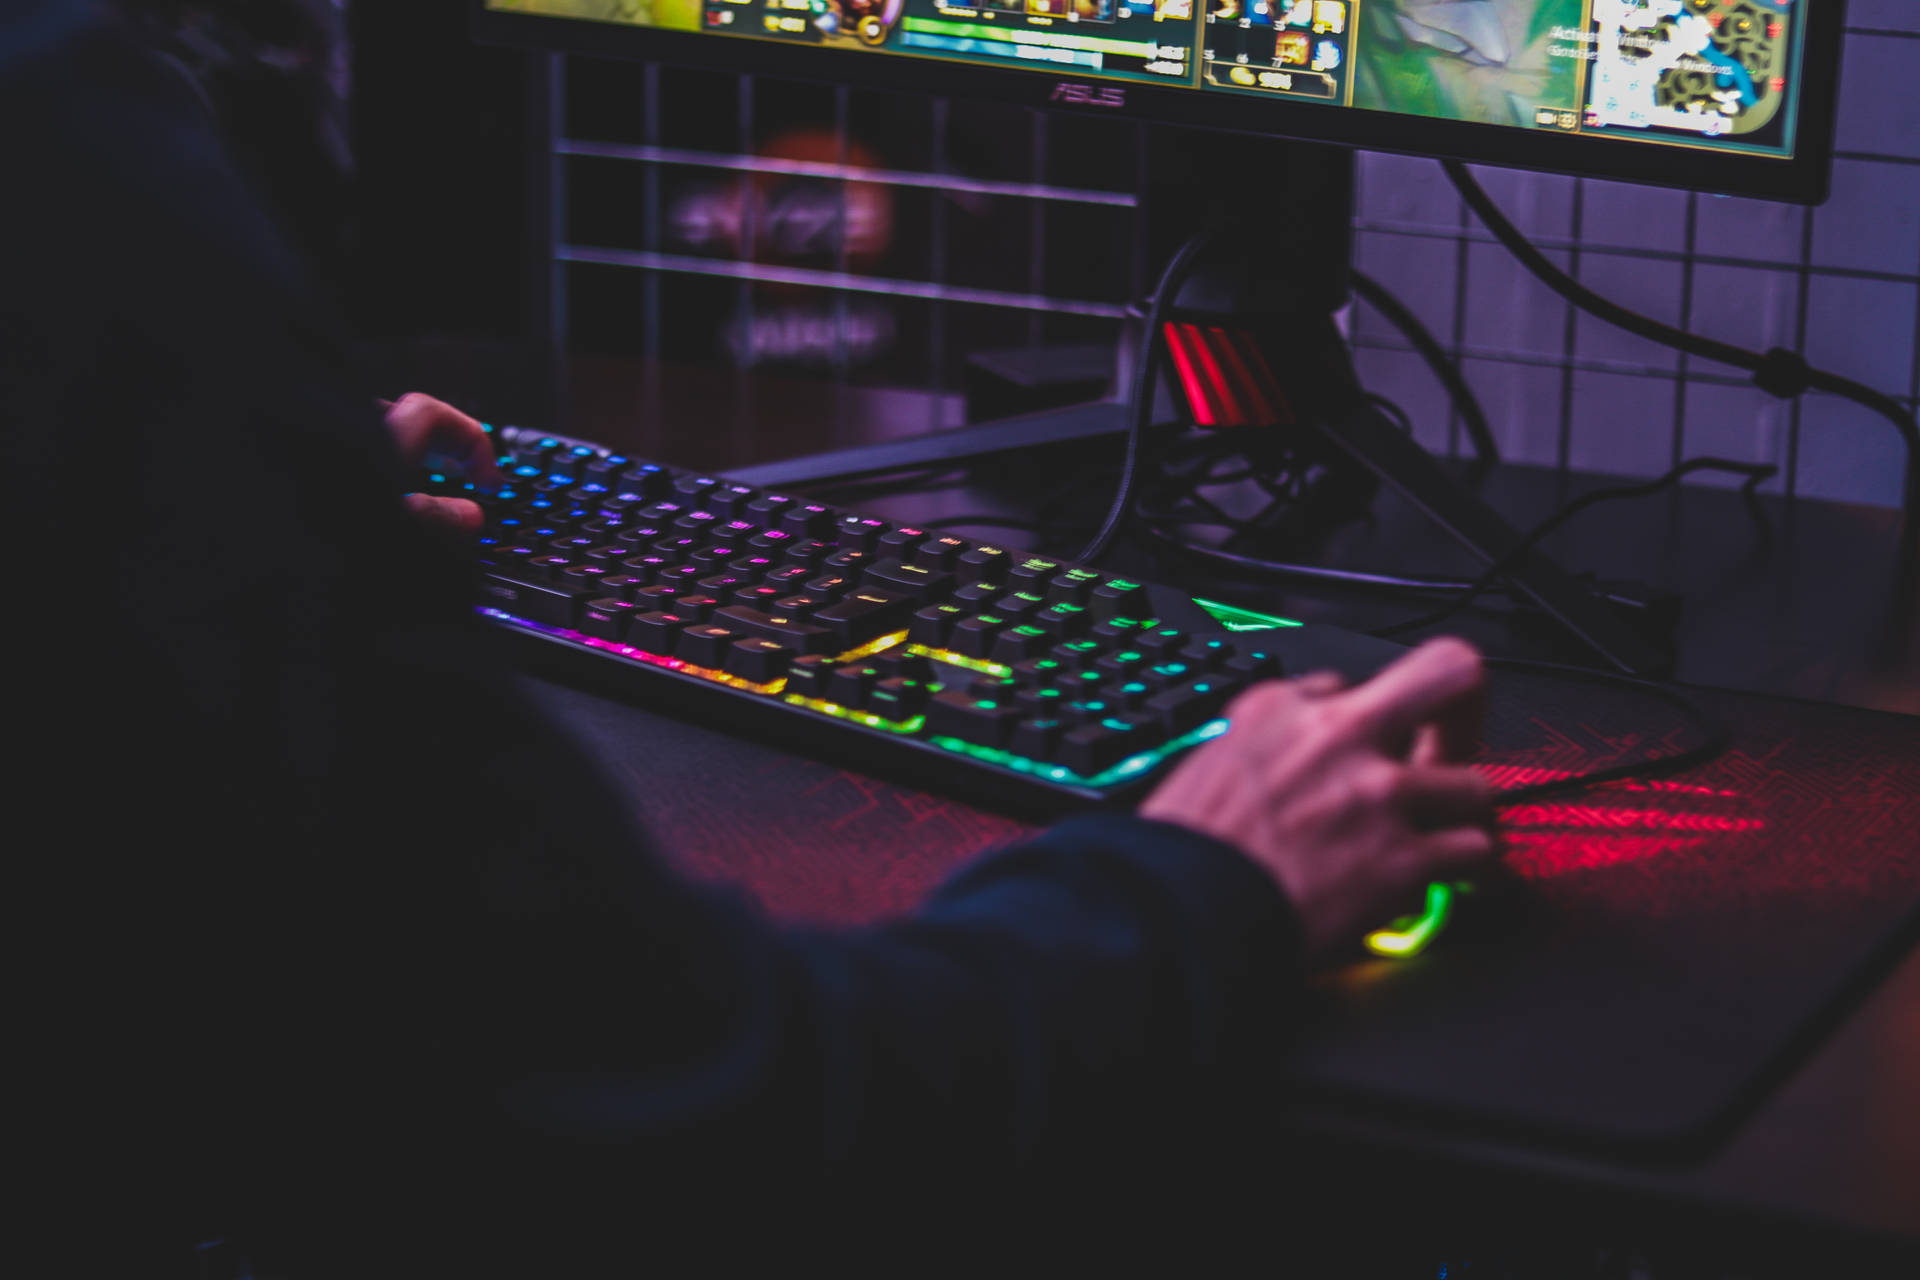 Gamer Hands On Keyboard And Mouse